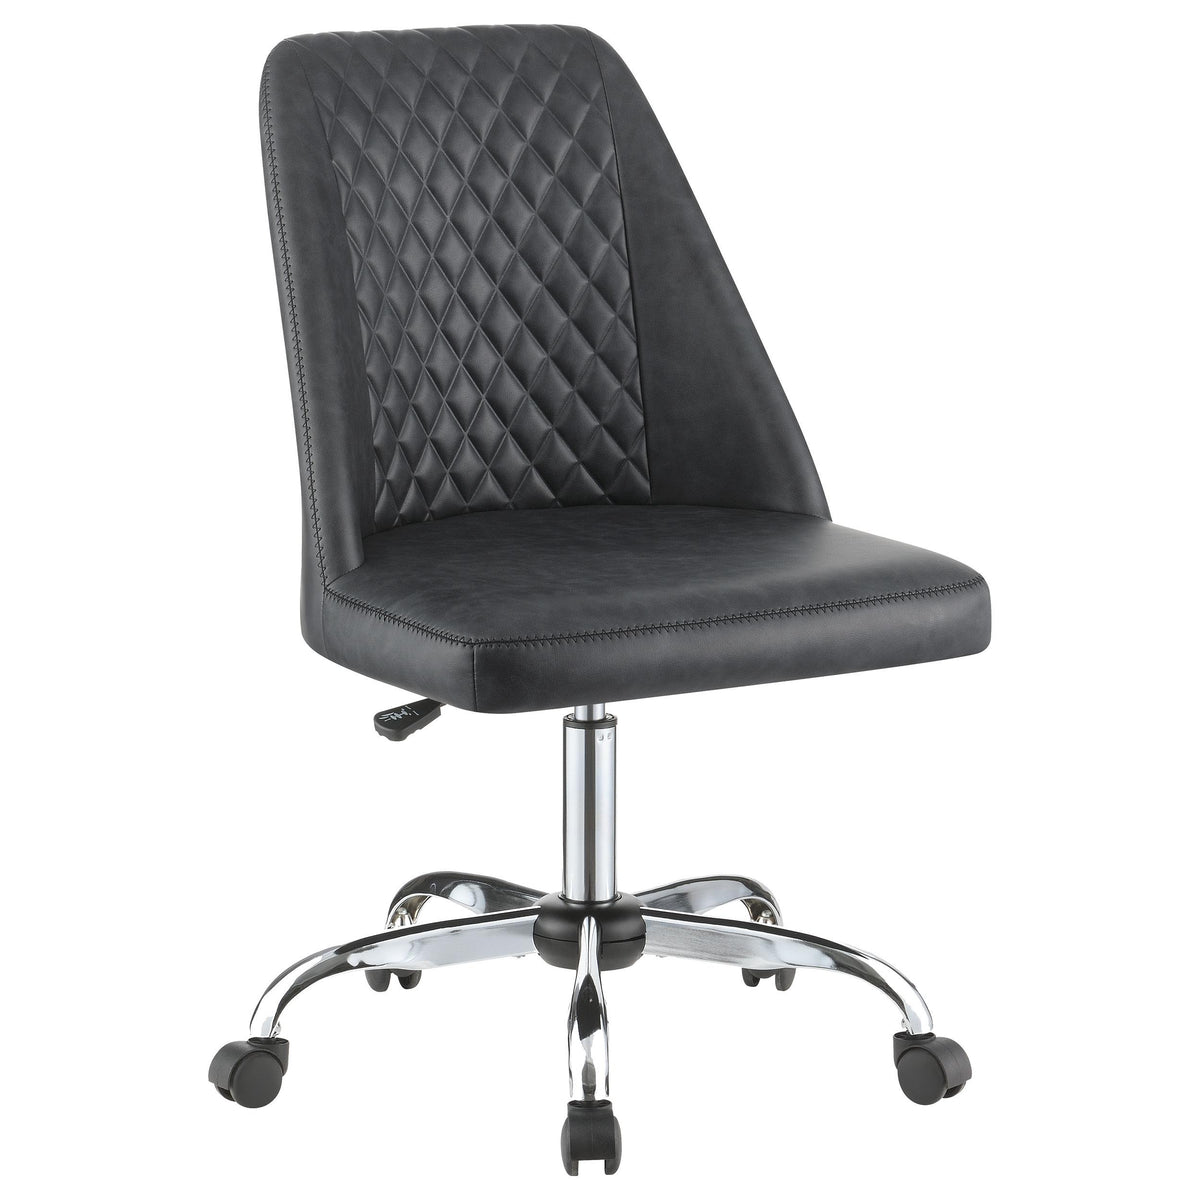 Althea Upholstered Tufted Back Office Chair Grey and Chrome Althea Upholstered Tufted Back Office Chair Grey and Chrome Half Price Furniture